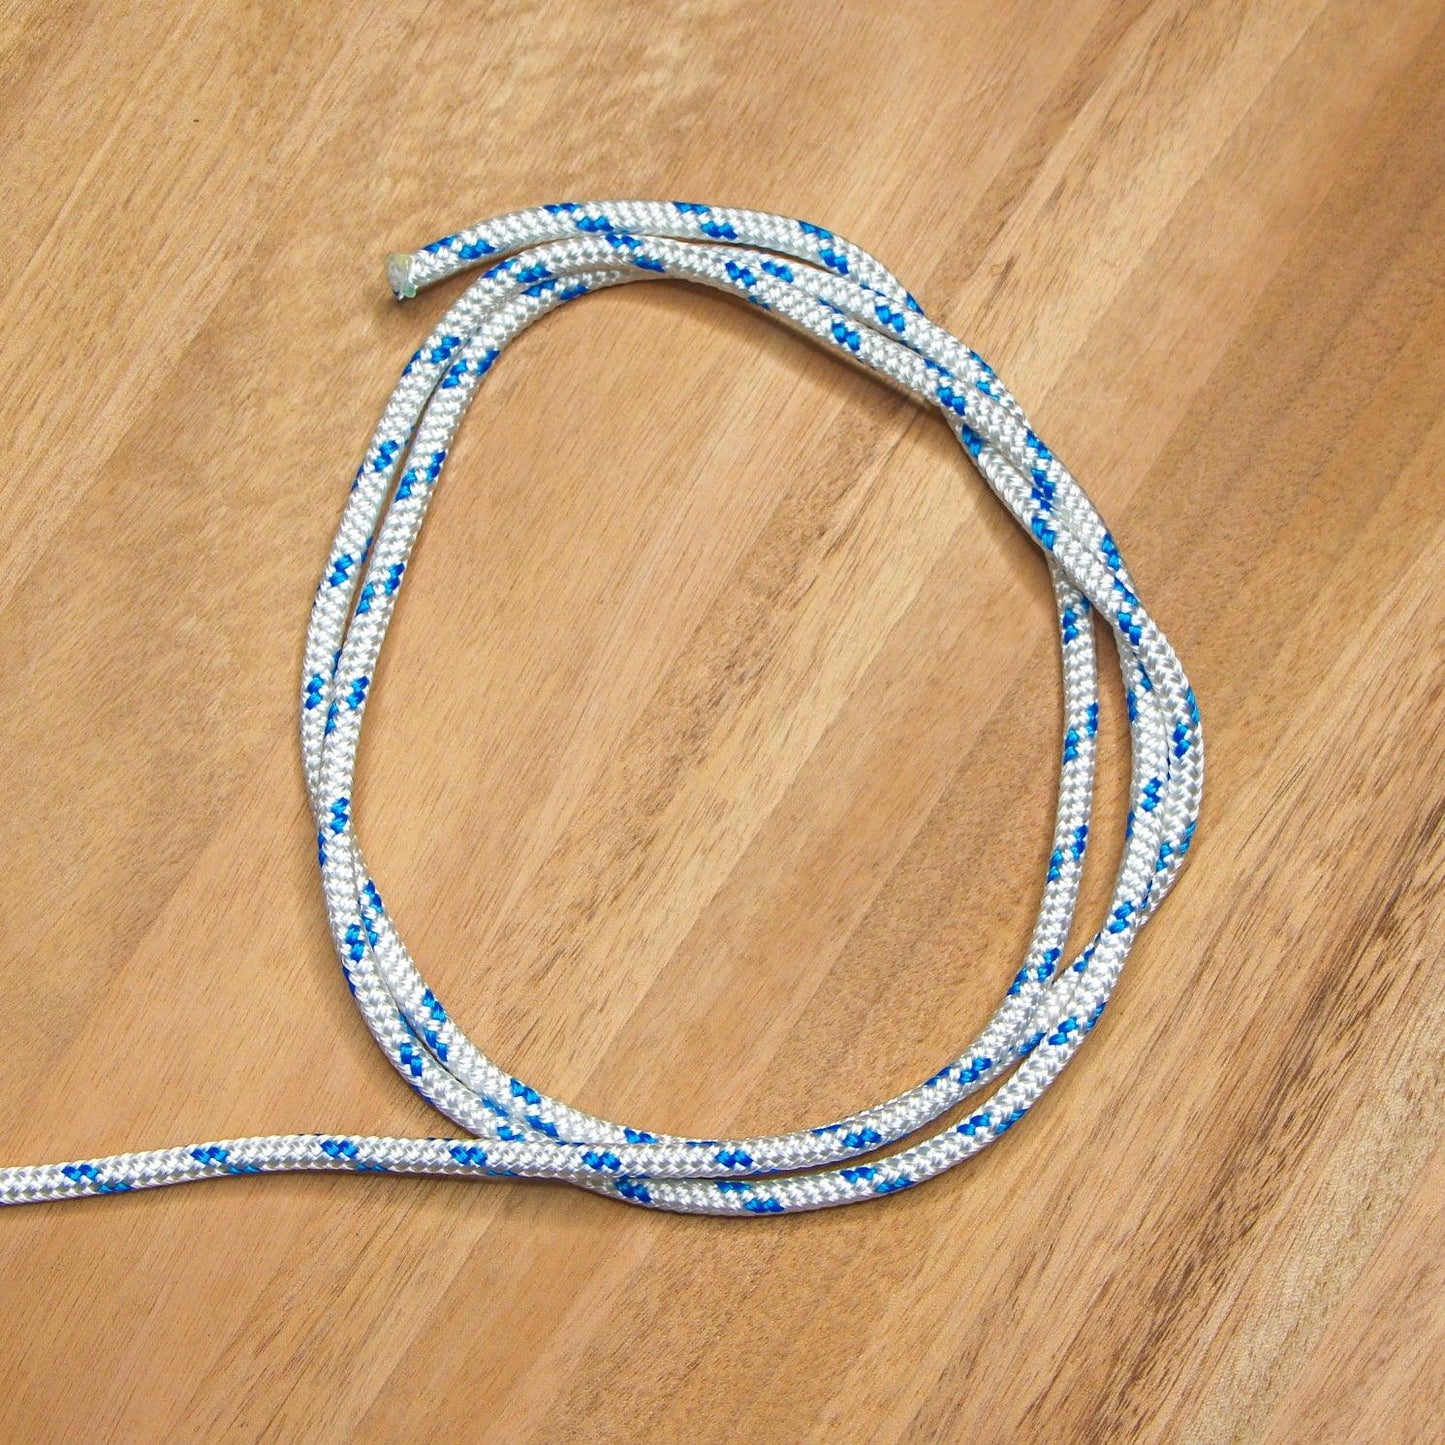 Marine Rope - White & Blue fleck - 6mm - Cams Cords